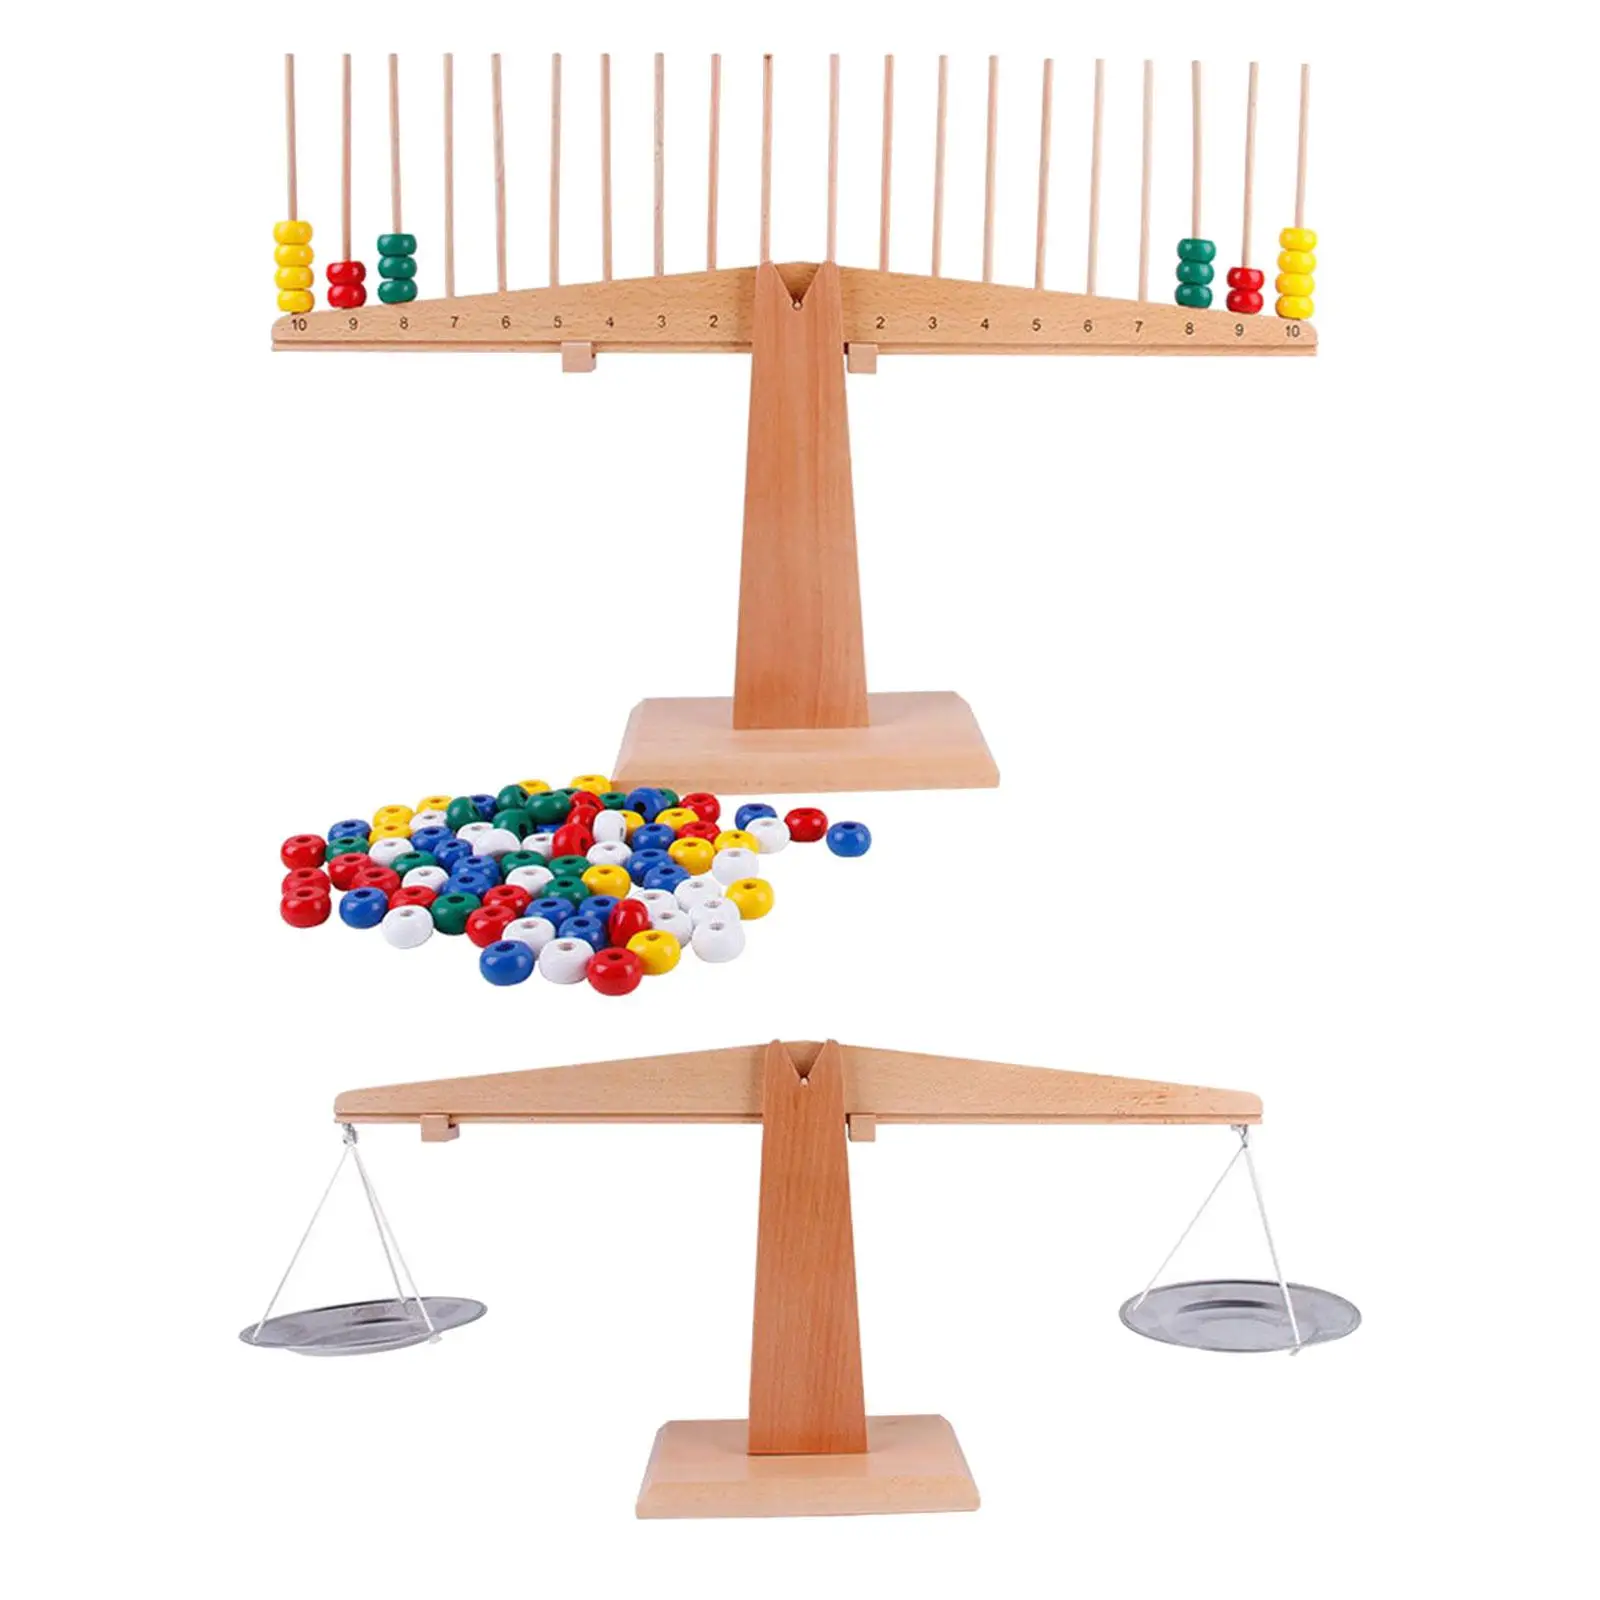 Kids Balance Scale Develops Motor Skills Visual Perception Skills Montessori Educational Toy for Ages 3 4 5 Year Old Ages 3+